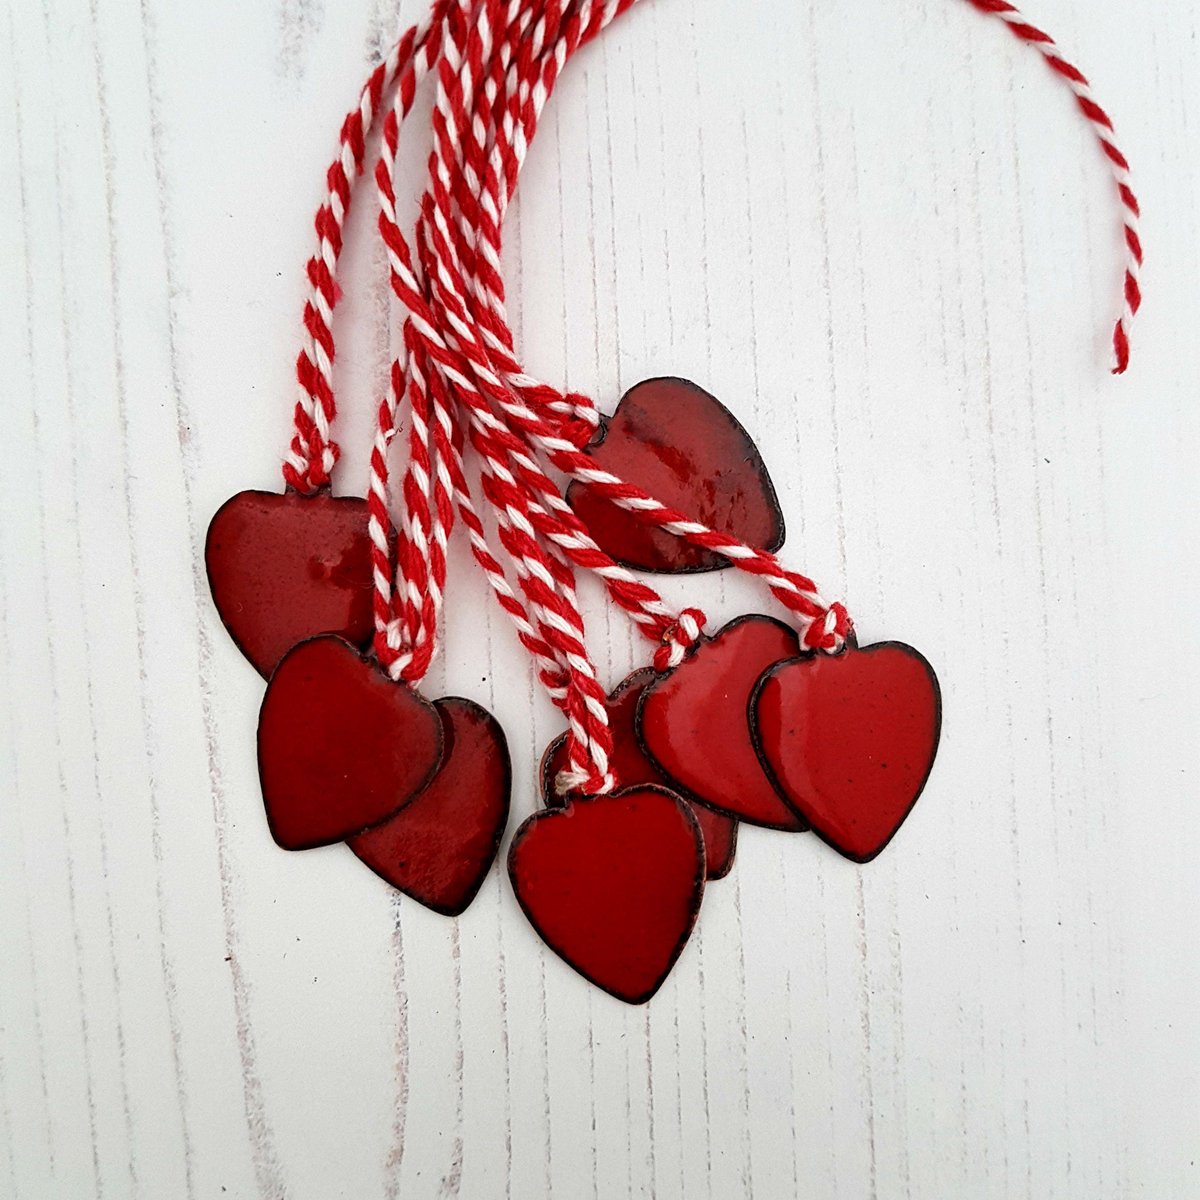 Heart Gift Tag for Gift Wrapping - Heart gift Wrap Decoration tuppu.net/cb1be561 #MaisyPlum #Etsy #ShopIndie #UKCraftersHour #MyNewTag #MHHSBD #WithLoveTag